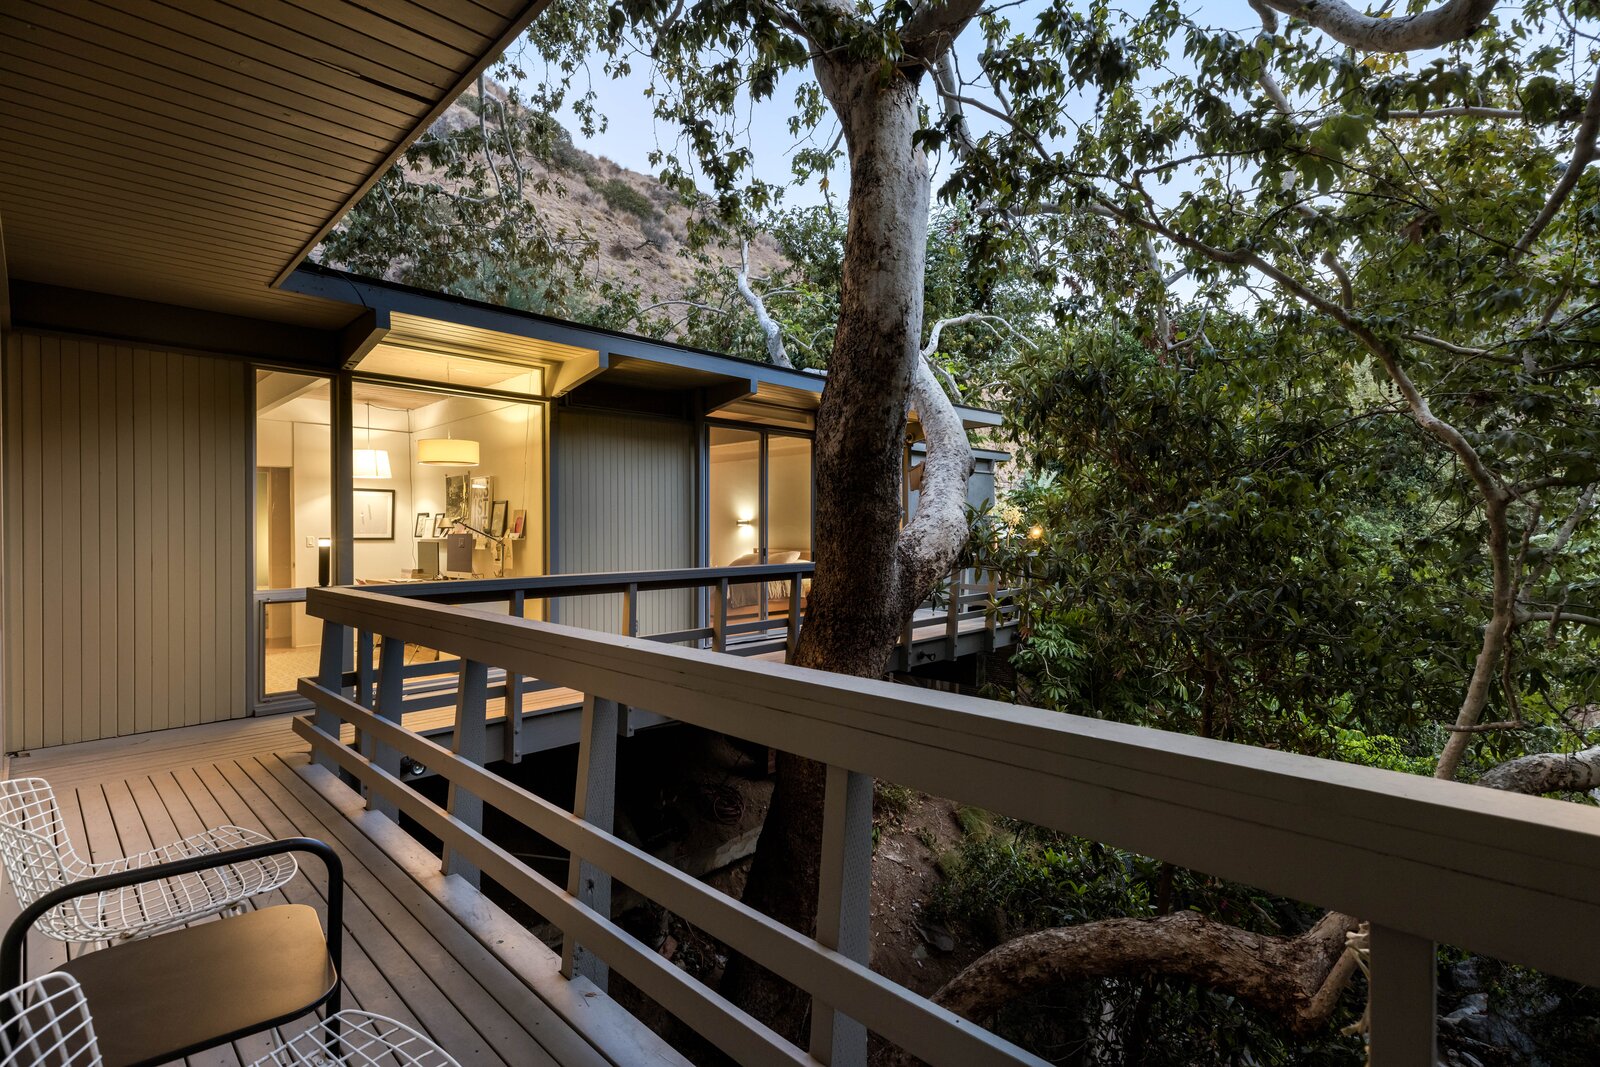 Hollywood Hills Midcentury Hovers in a Sycamore Canopy